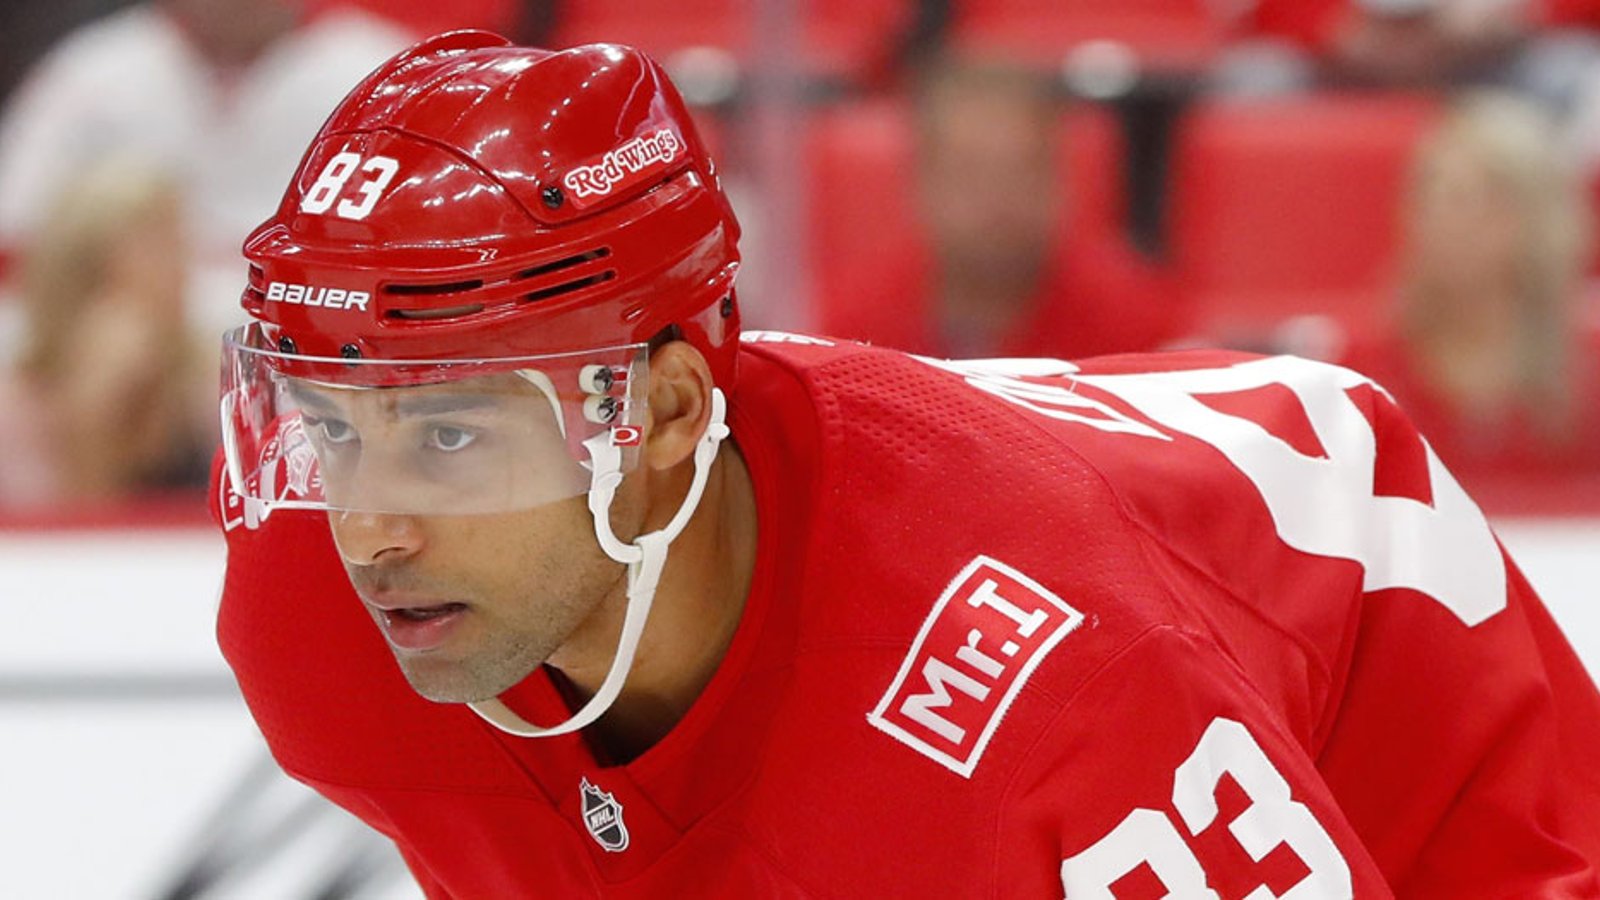 Veteran blueliner Trevor Daley requests a trade from Red Wings